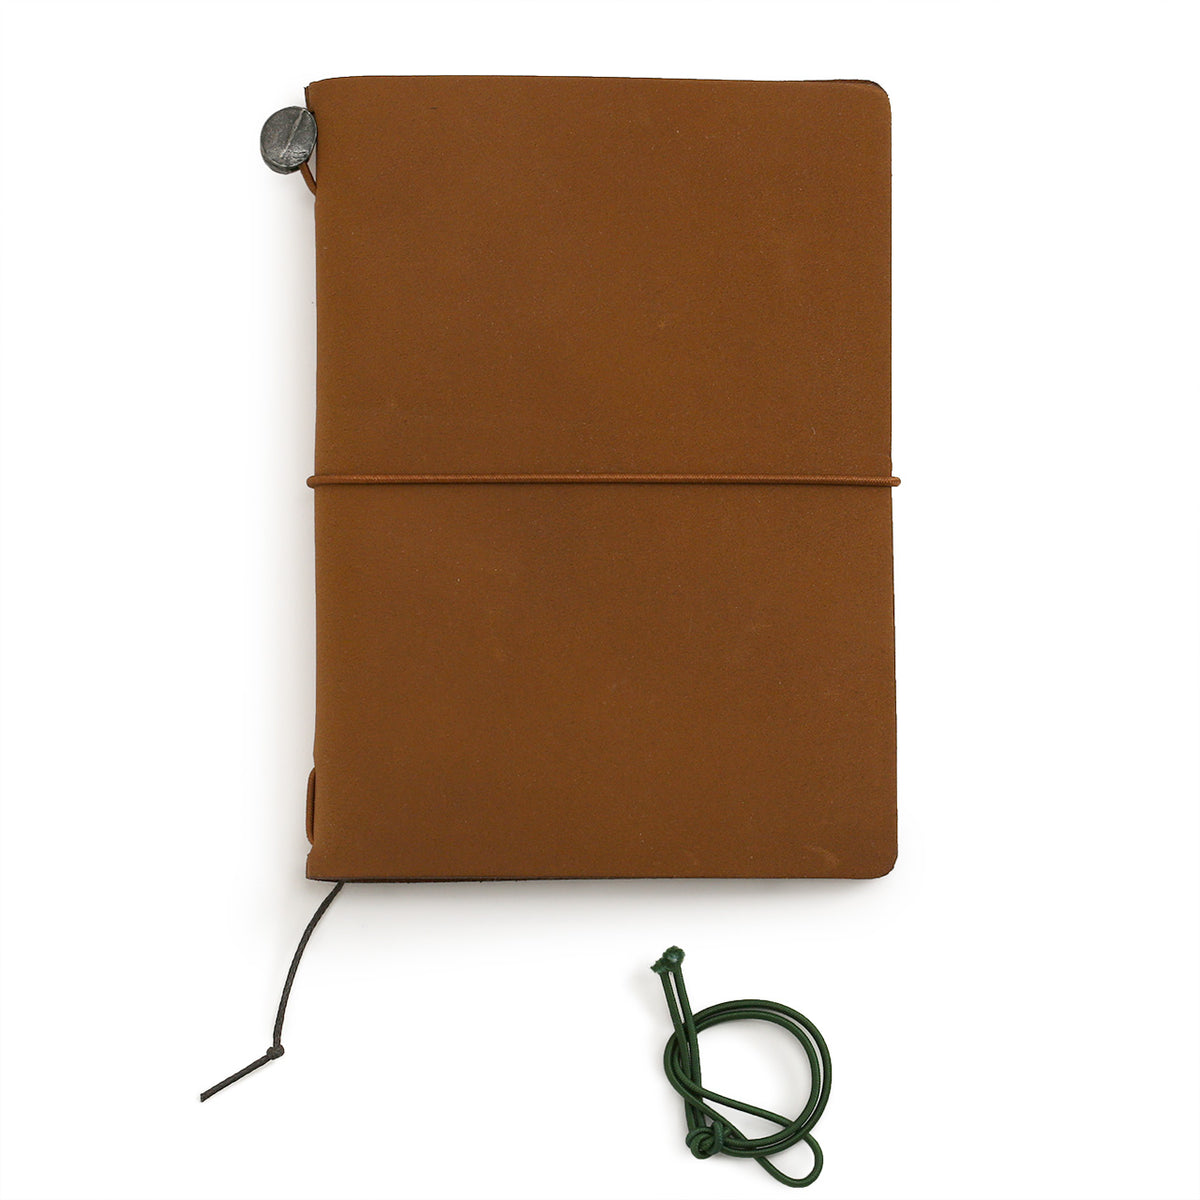 Camel coloured leather notebook cover with dark green extra elastic